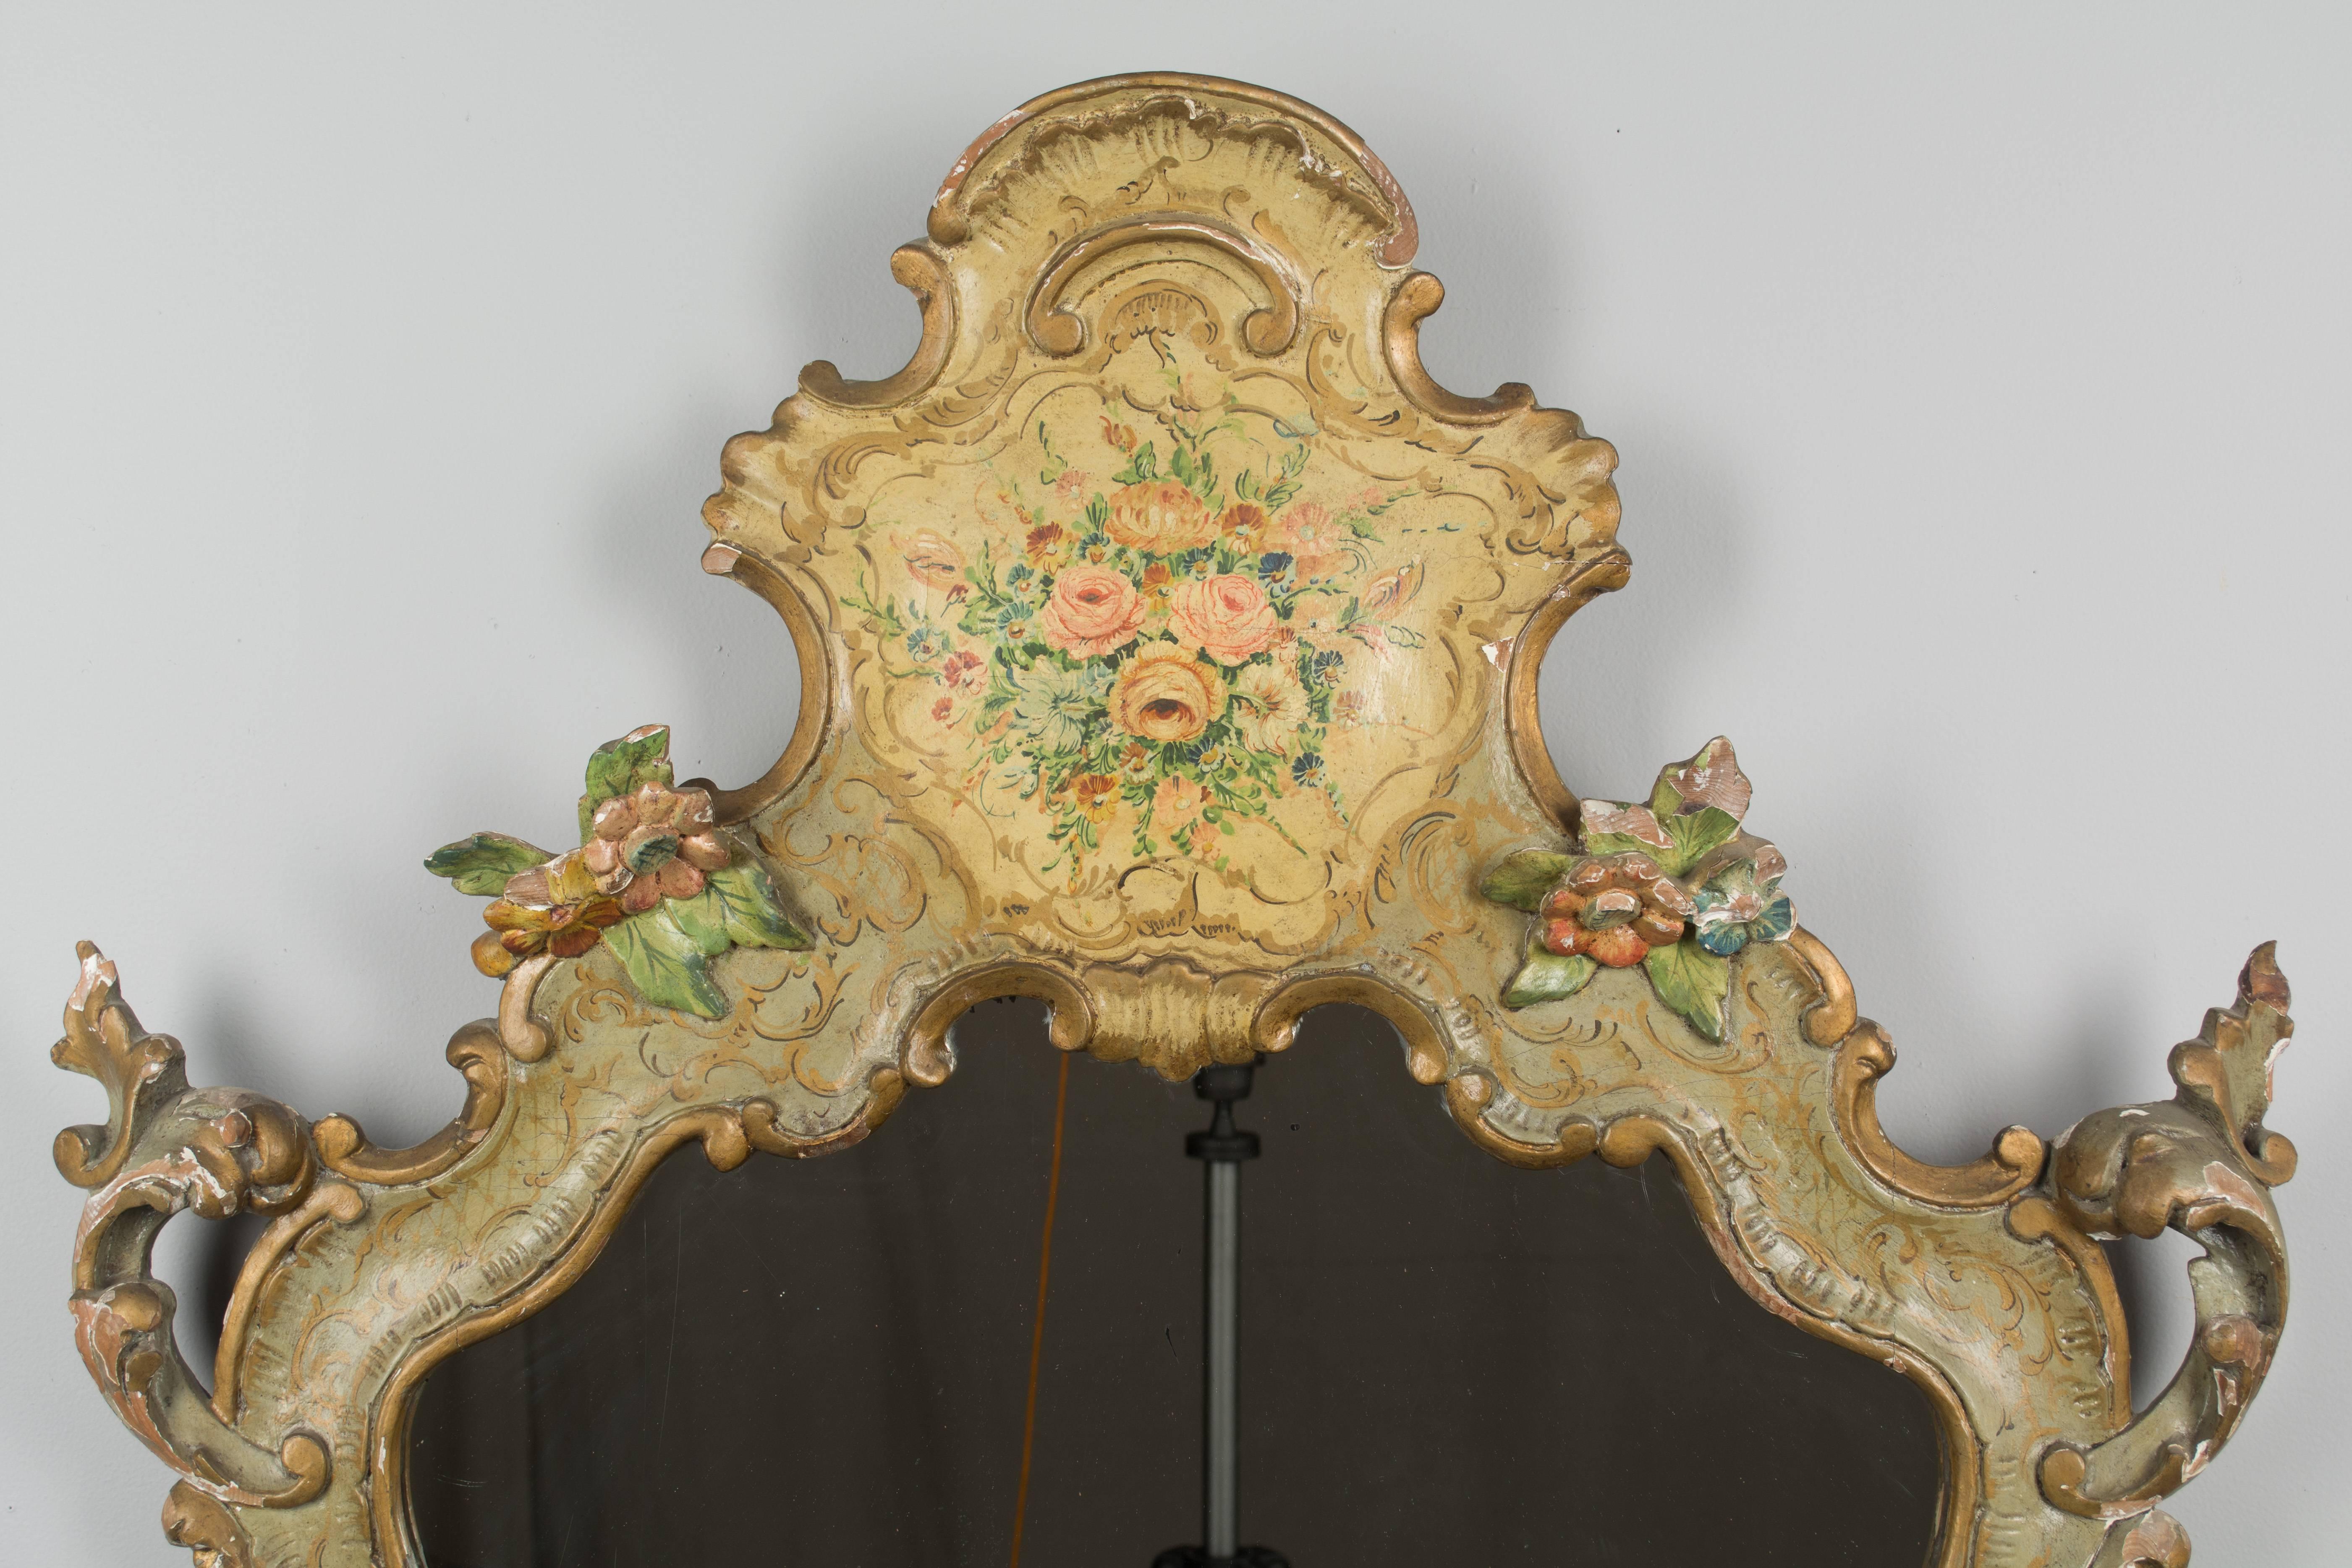 A 19th century painted Venetian mirror. Elaborately carved Rococo style frame with hand-painted floral decoration. All original with some paint loss.
More photos available upon request. We have a large selection of French antiques at Olivier Fleury,